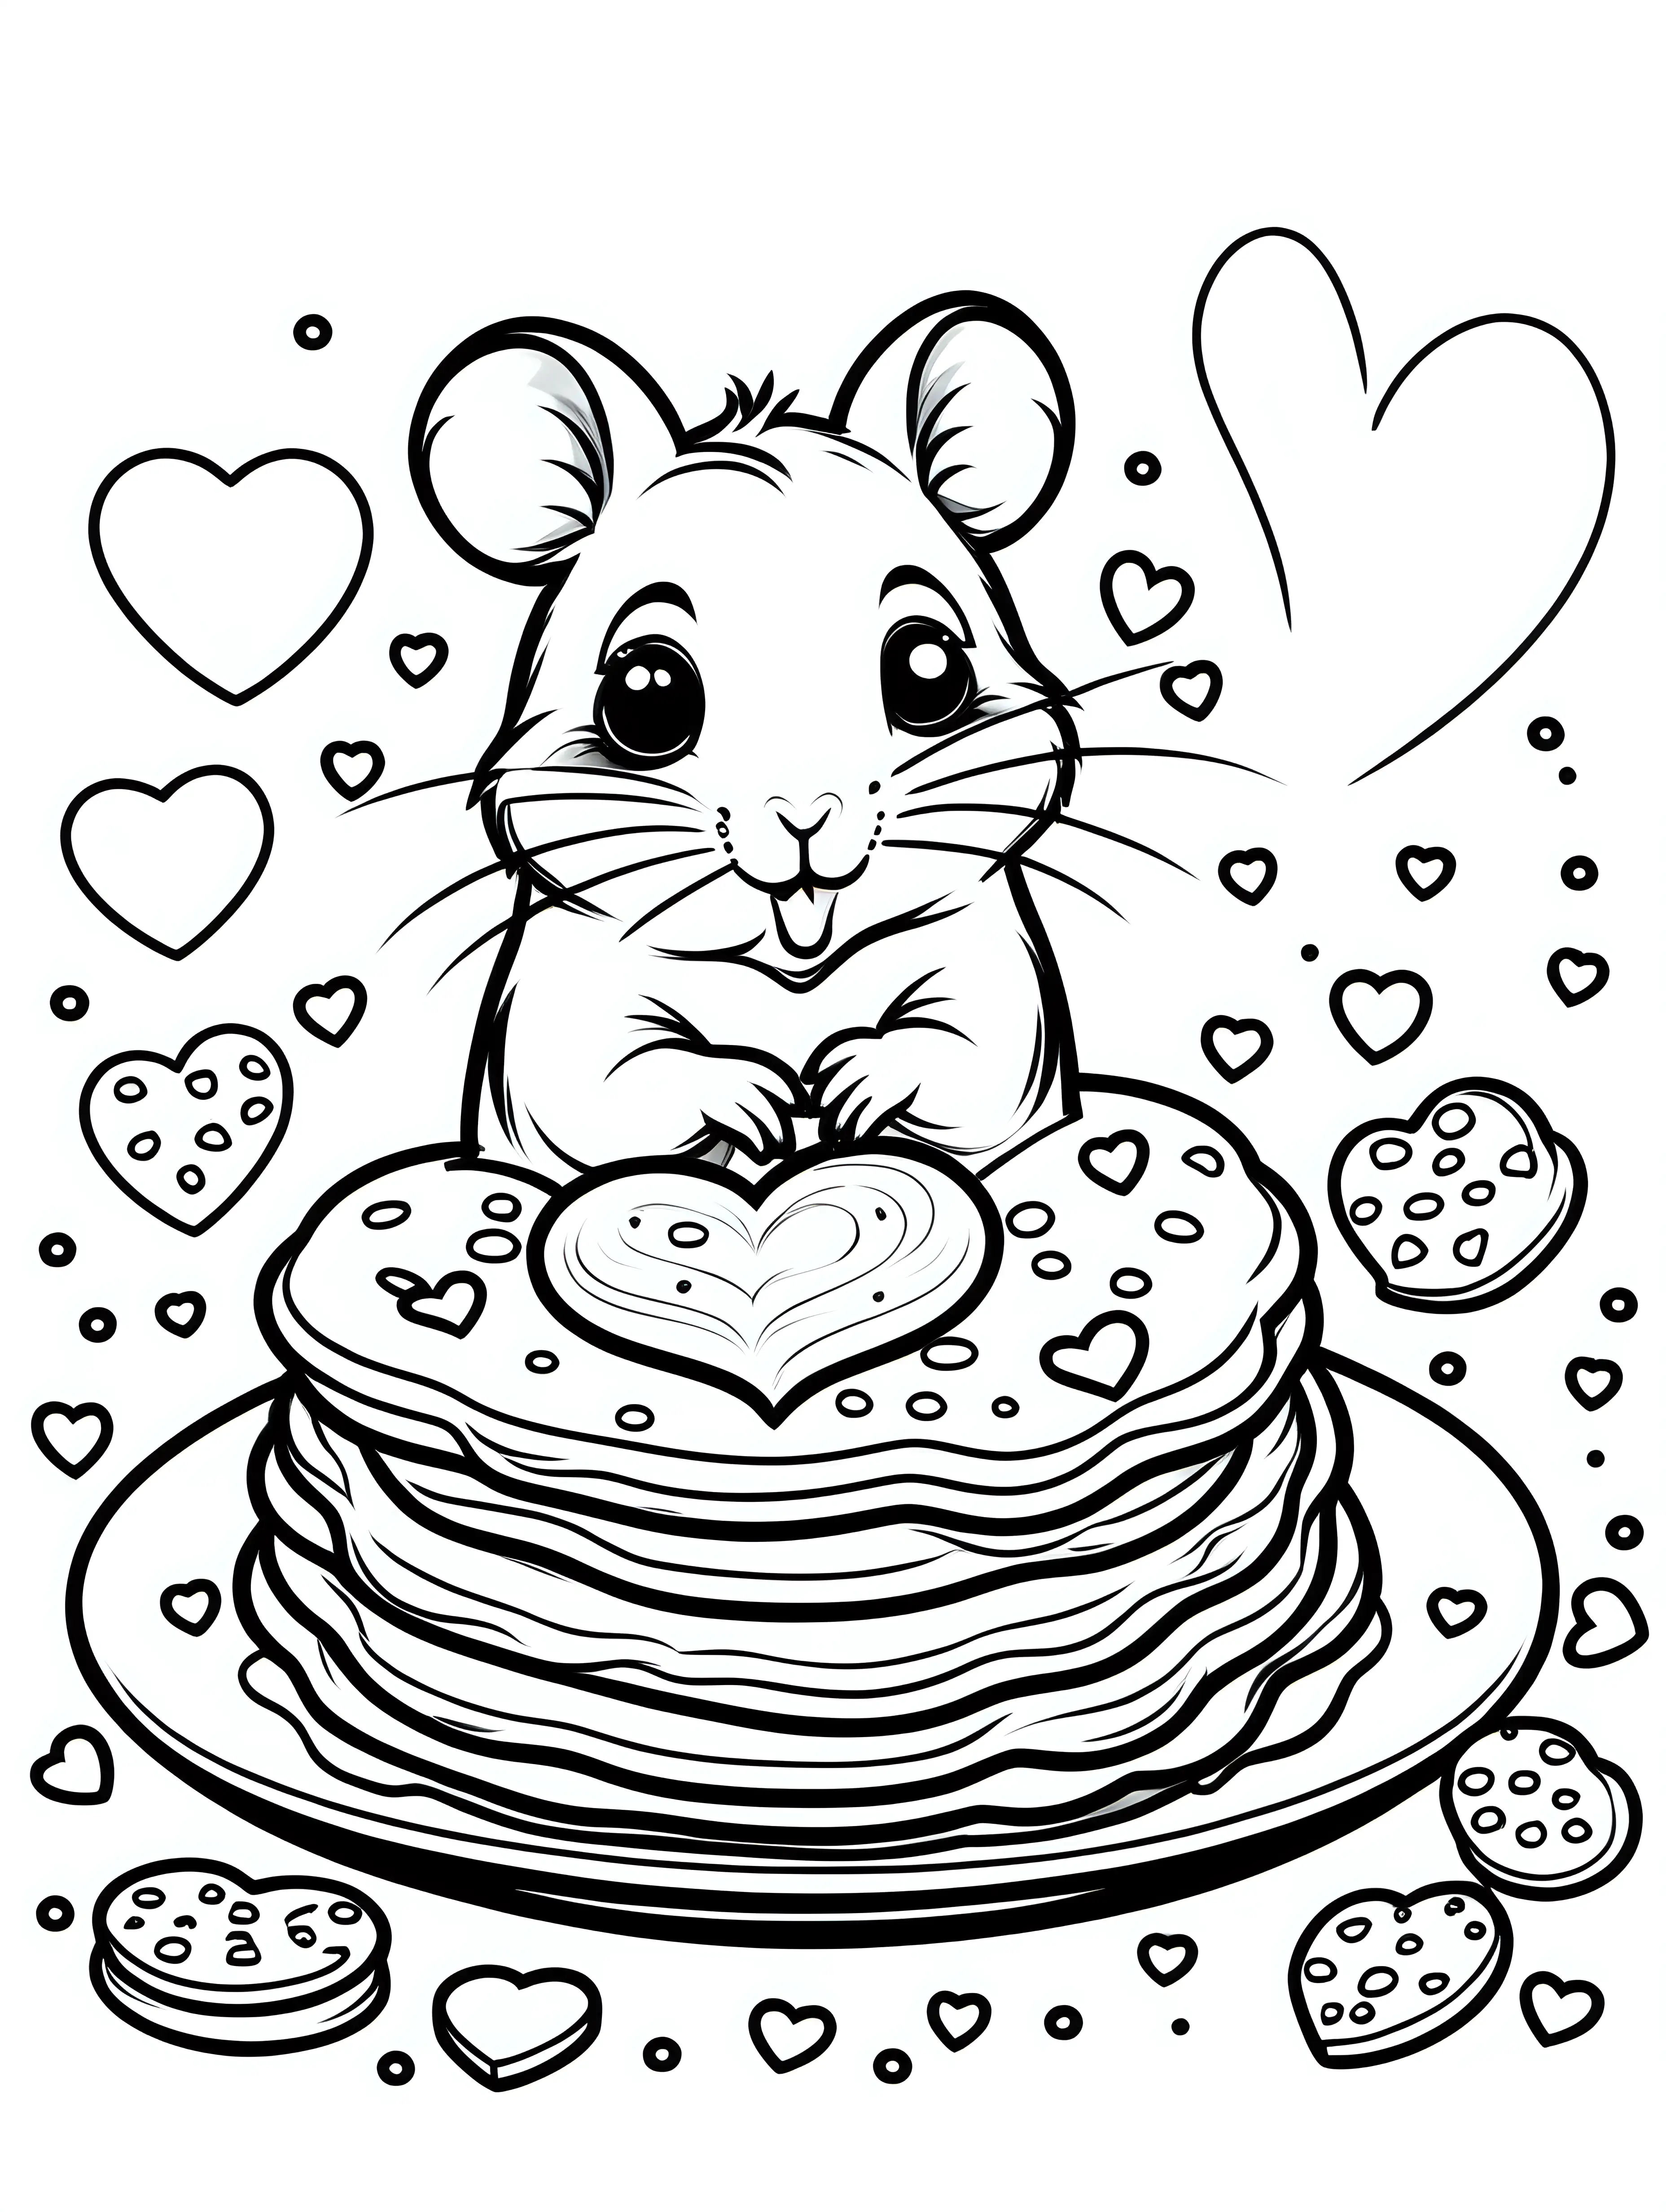 Adorable Hamsters Enjoy HeartShaped Pancakes Coloring Page